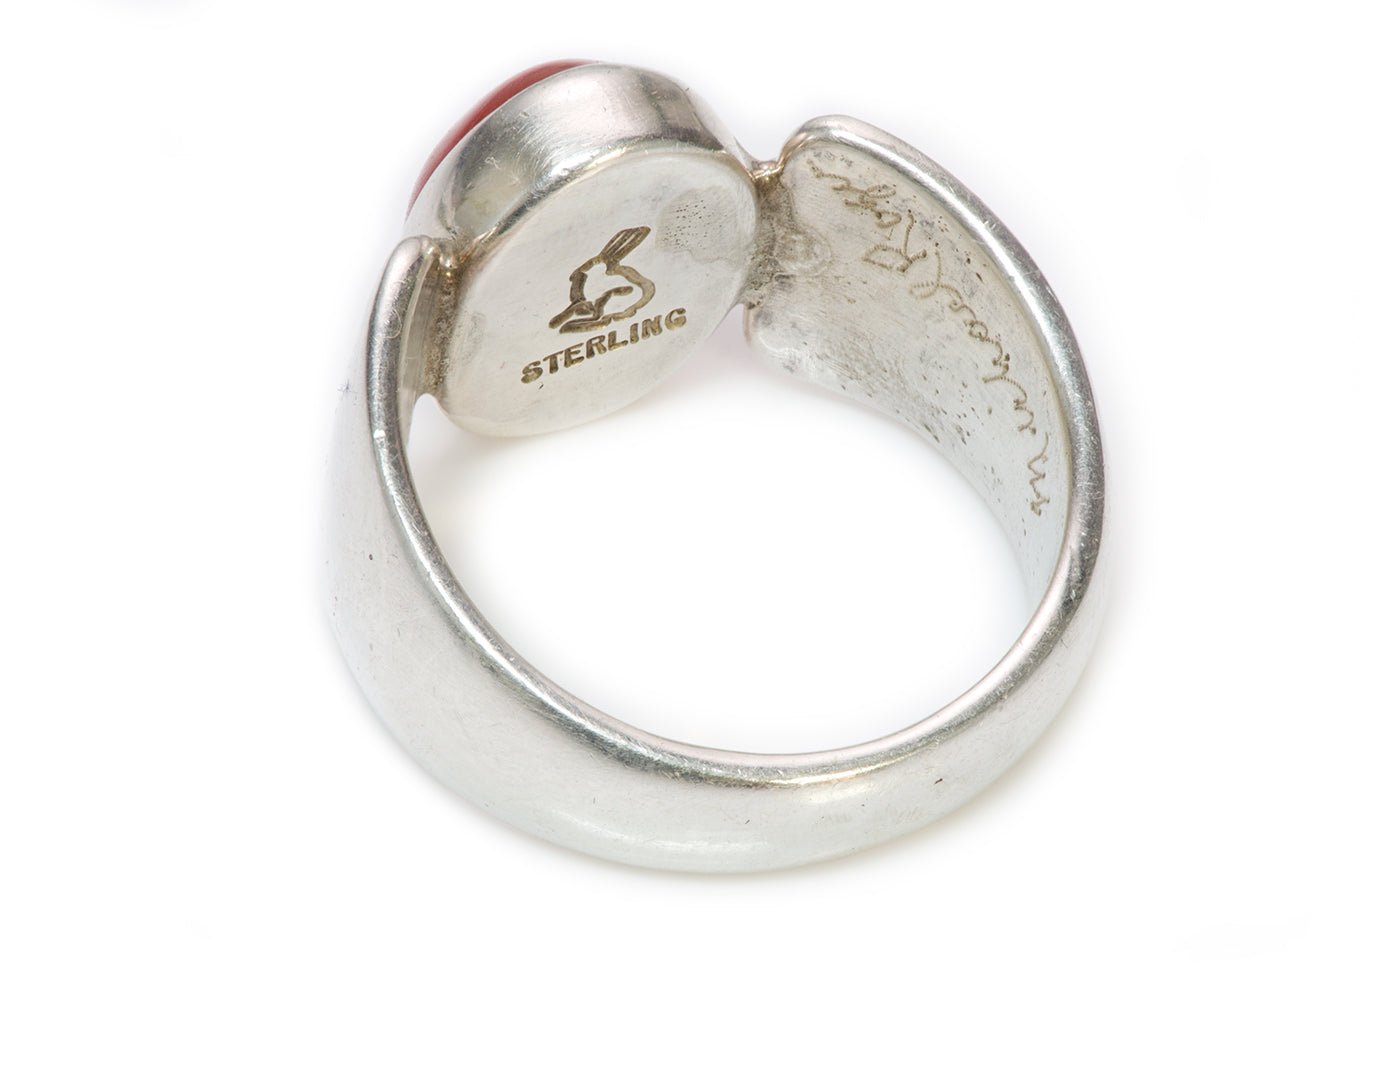 Michael Rogers Silver Coral Ring